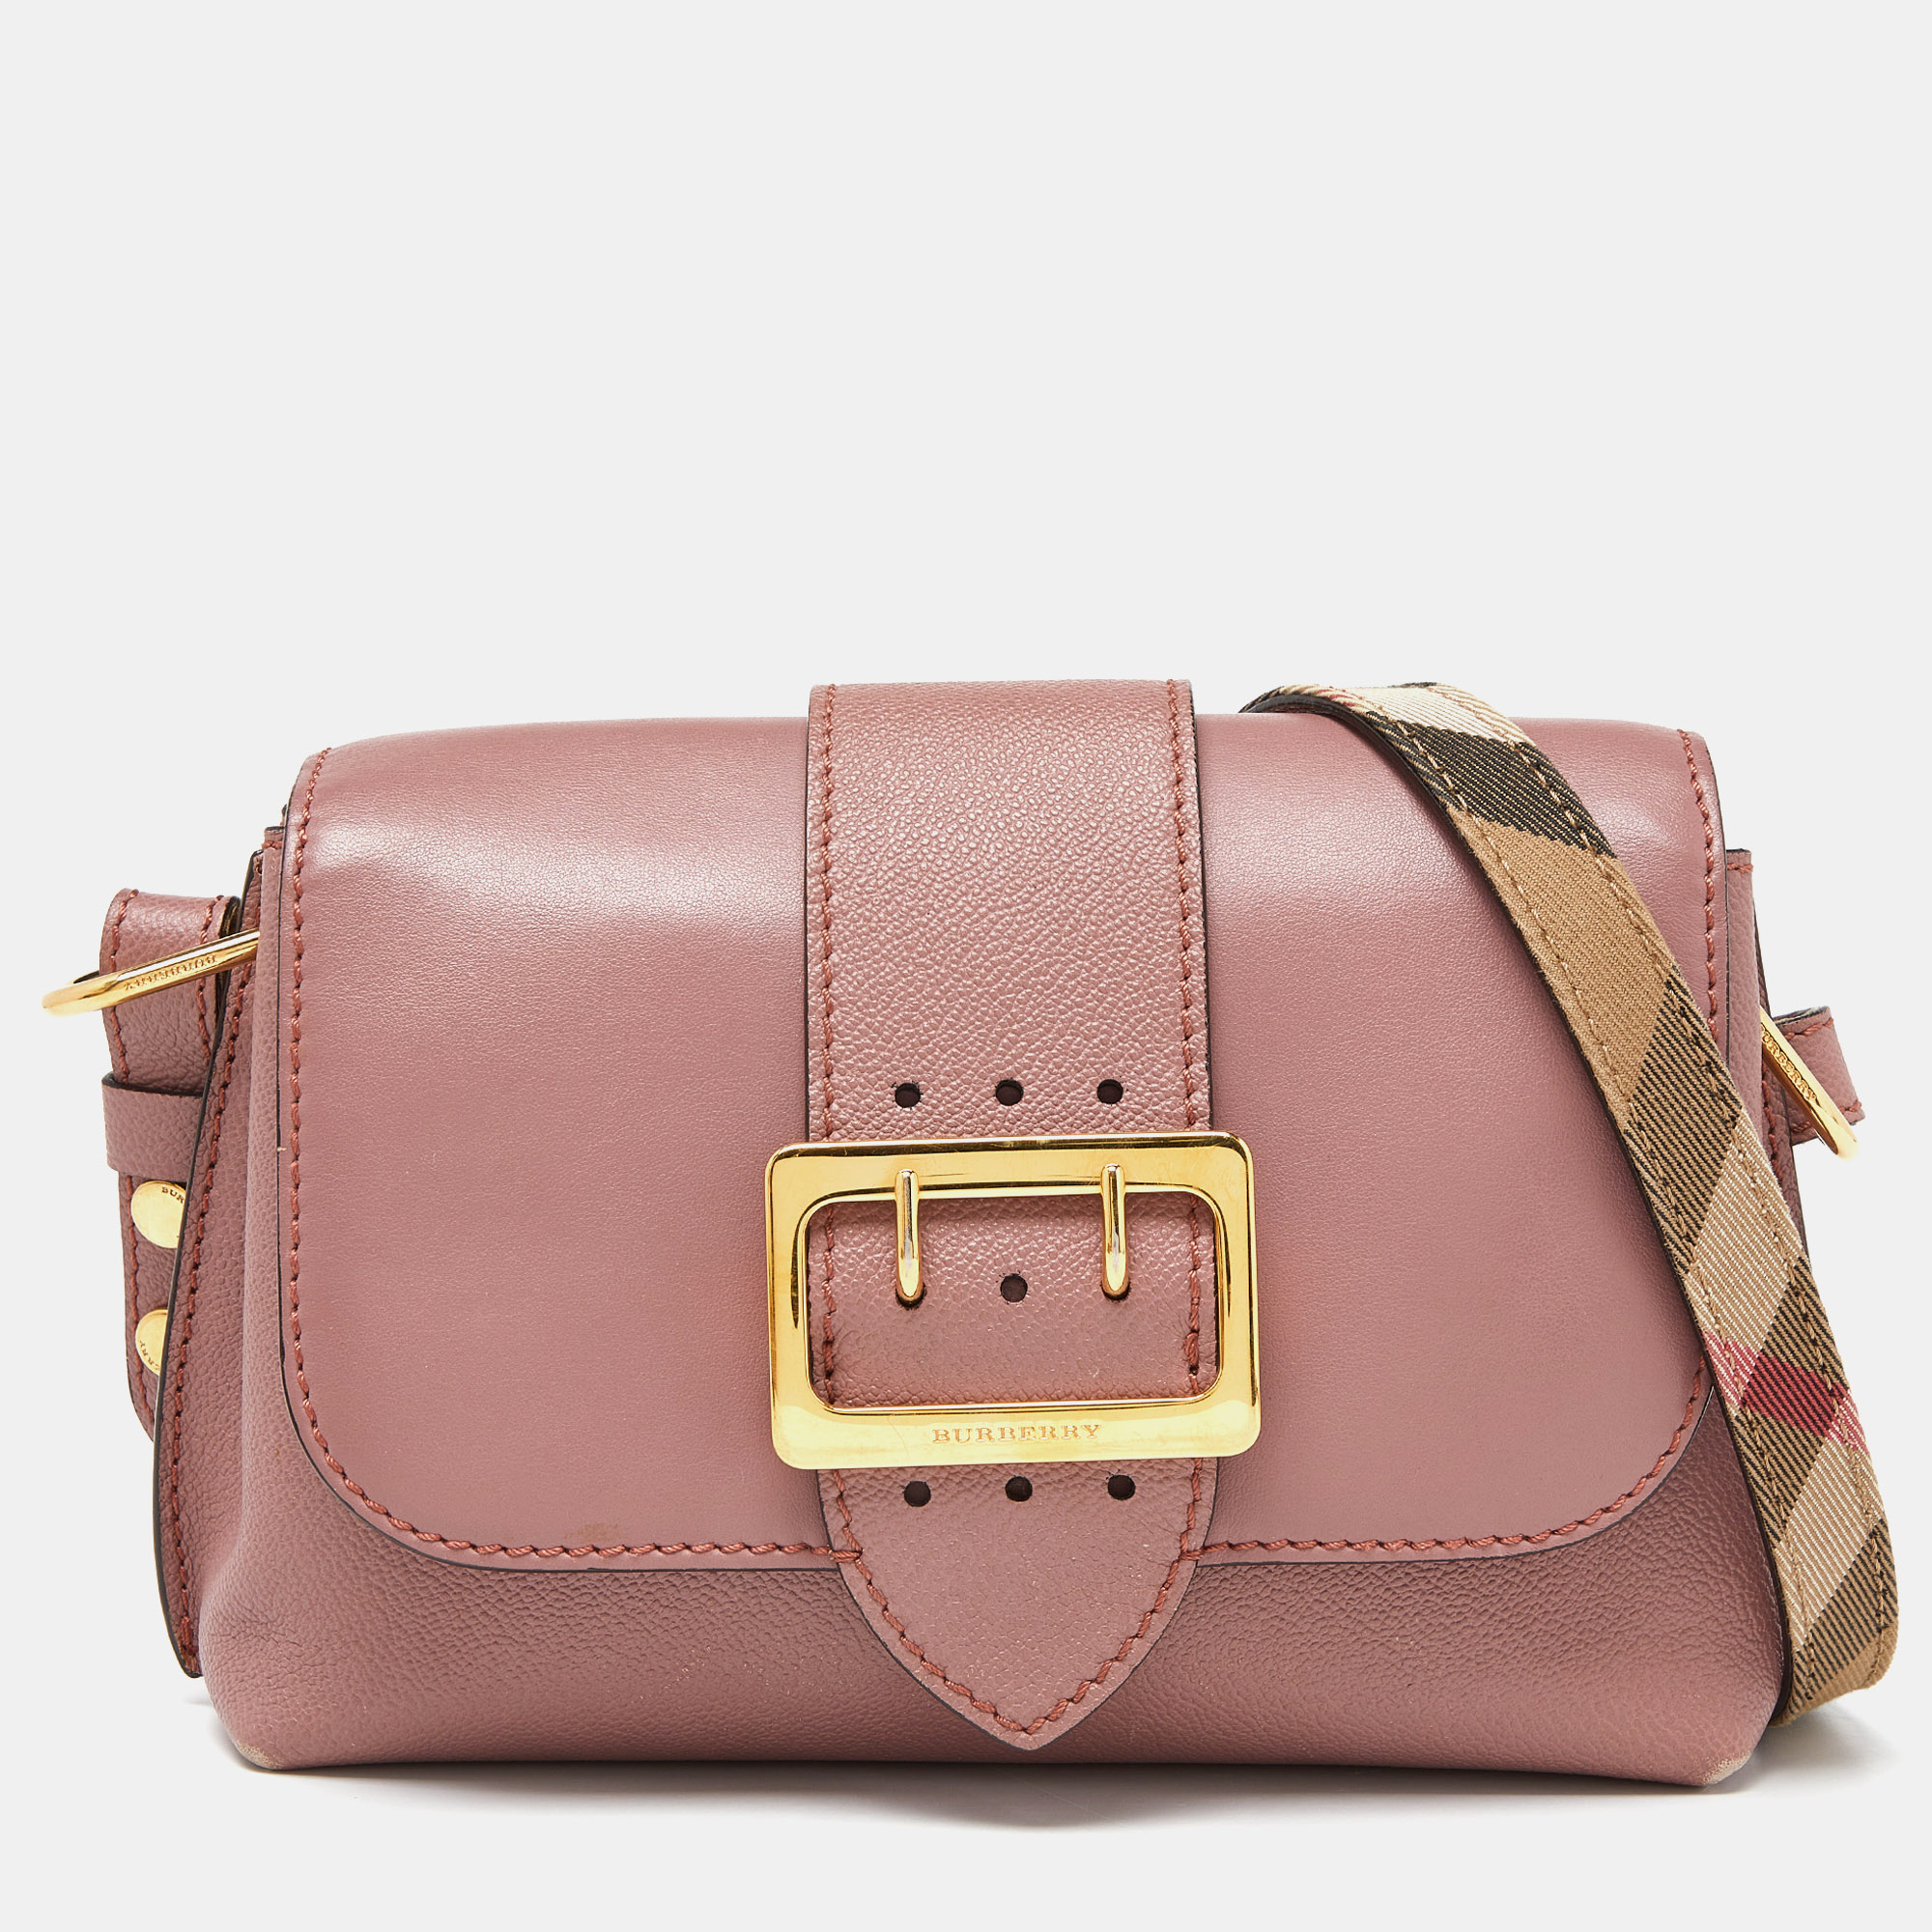 Pre-owned Burberry Blush Pink Leather Small Buckle Crossbody Bag